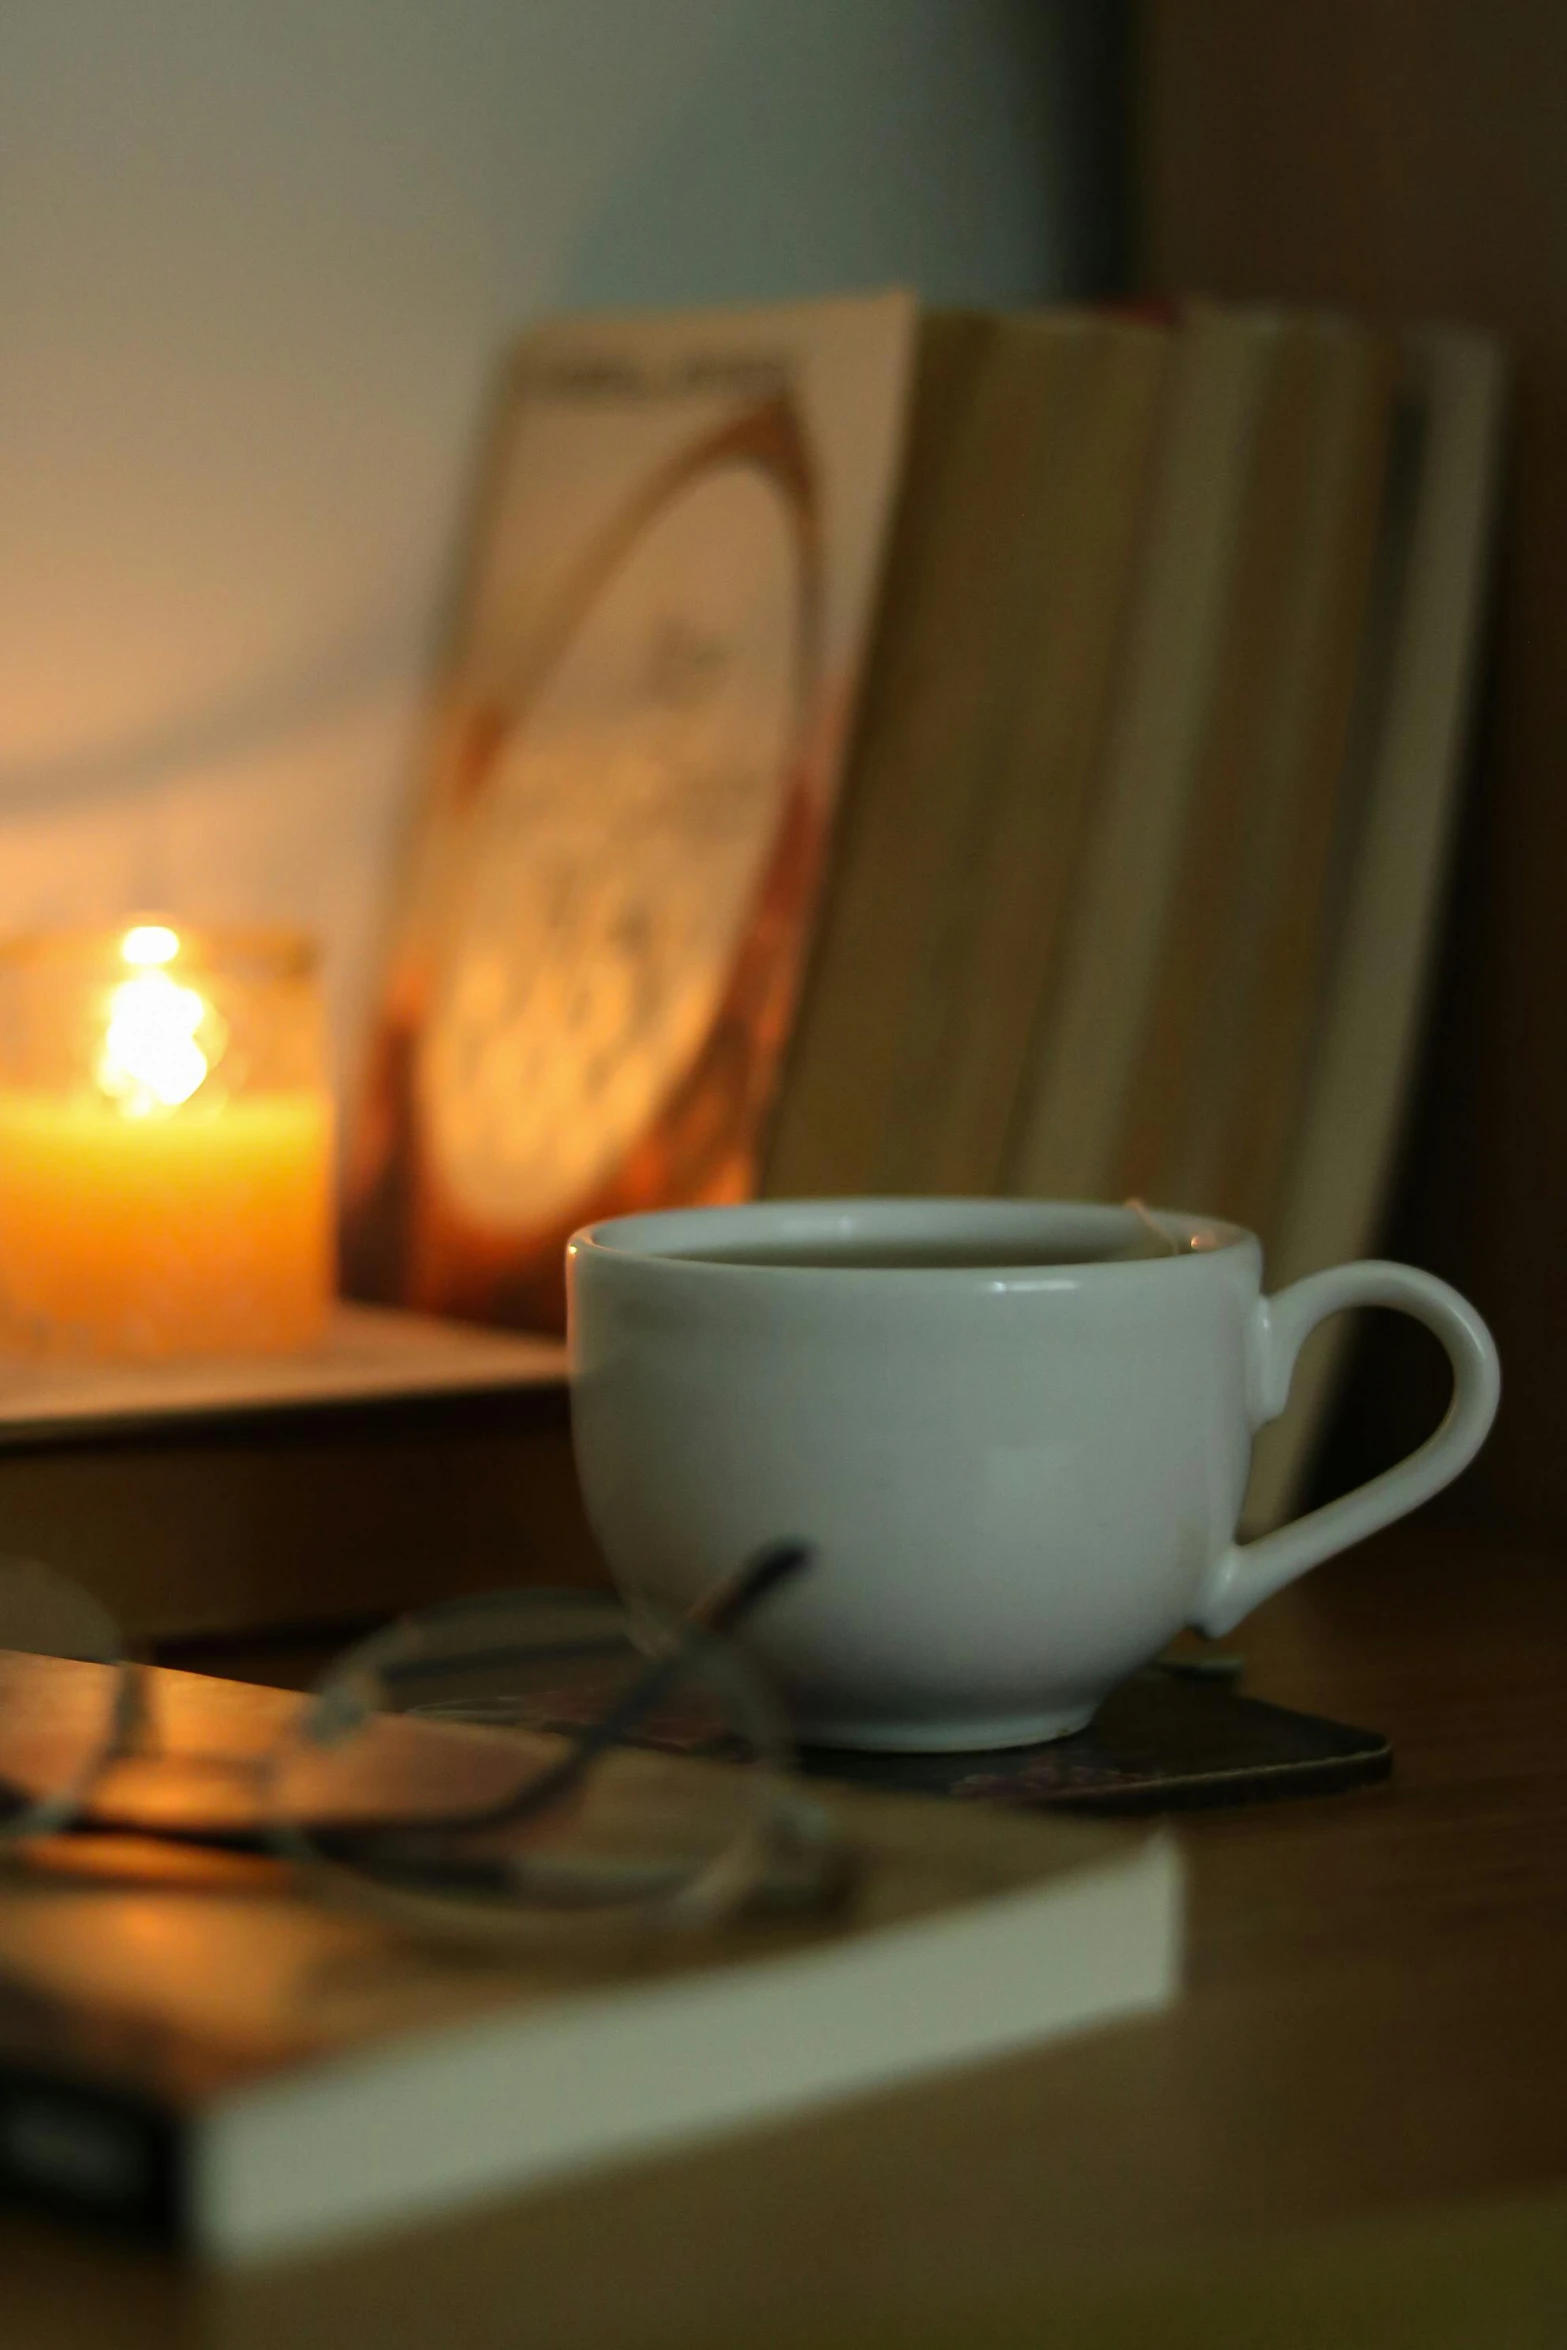 the teacup is beside some books, a candle, and a book